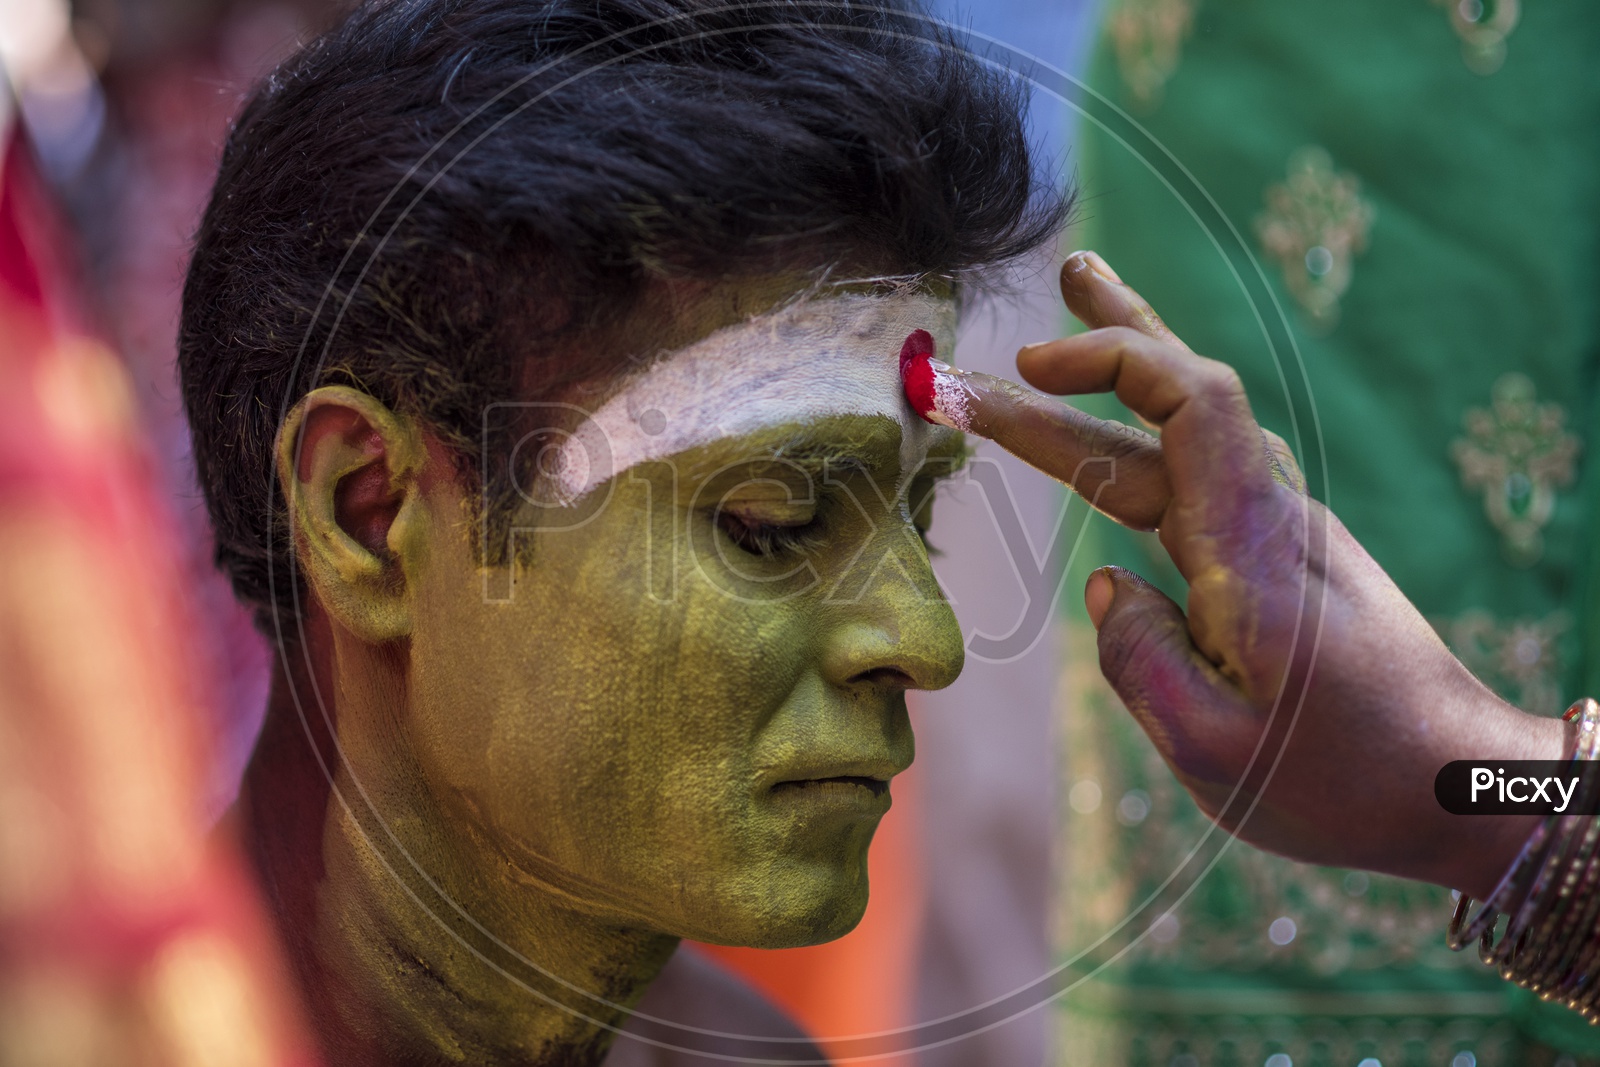 A man getting ready for the Festival of Kali Kaveripattinam